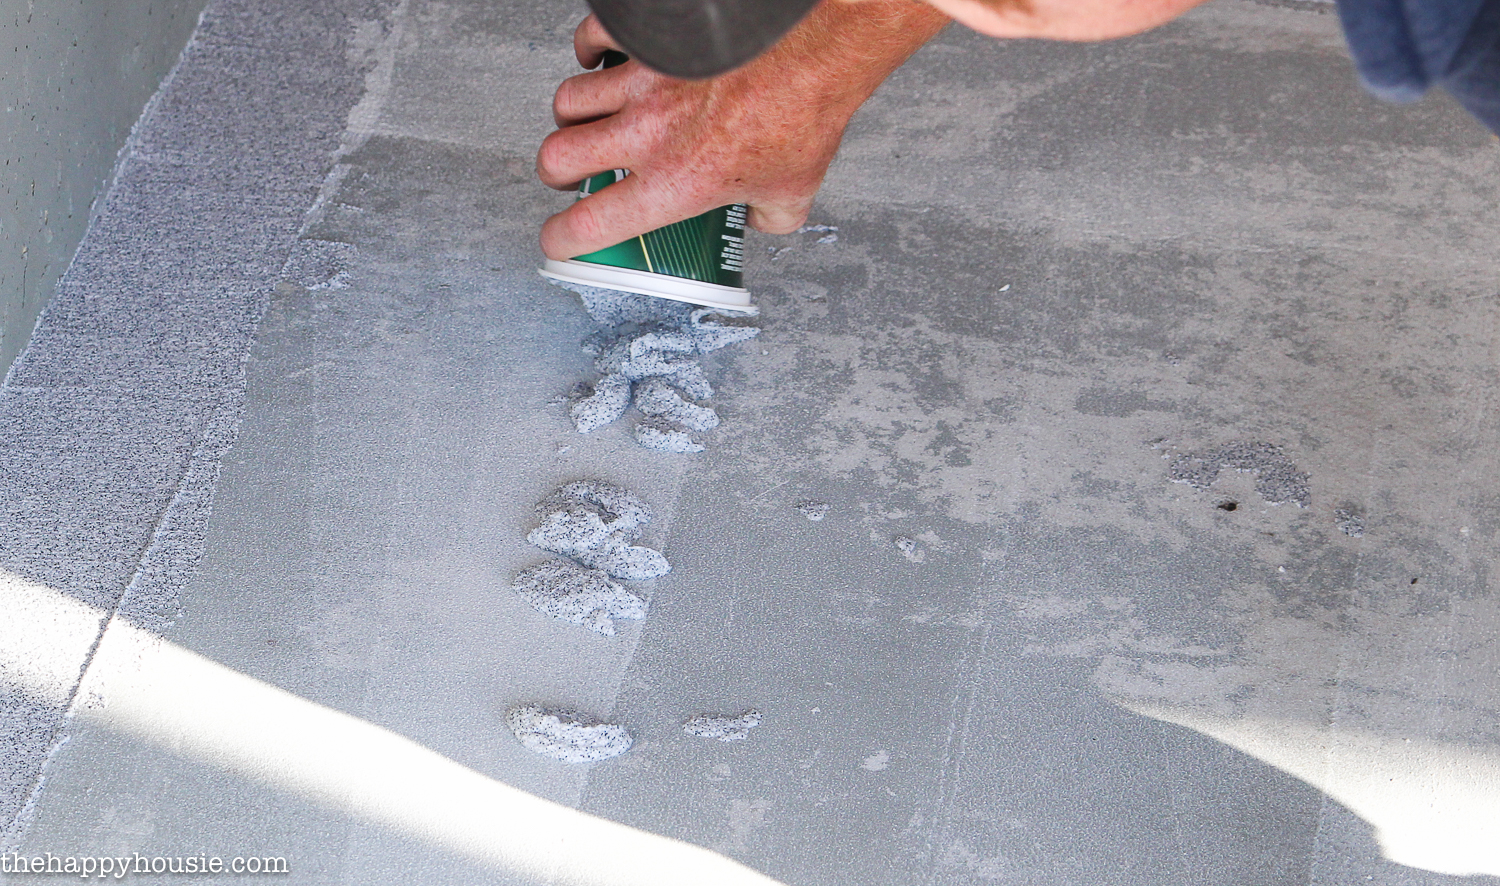 Applying more of the product to the concrete patio floor.